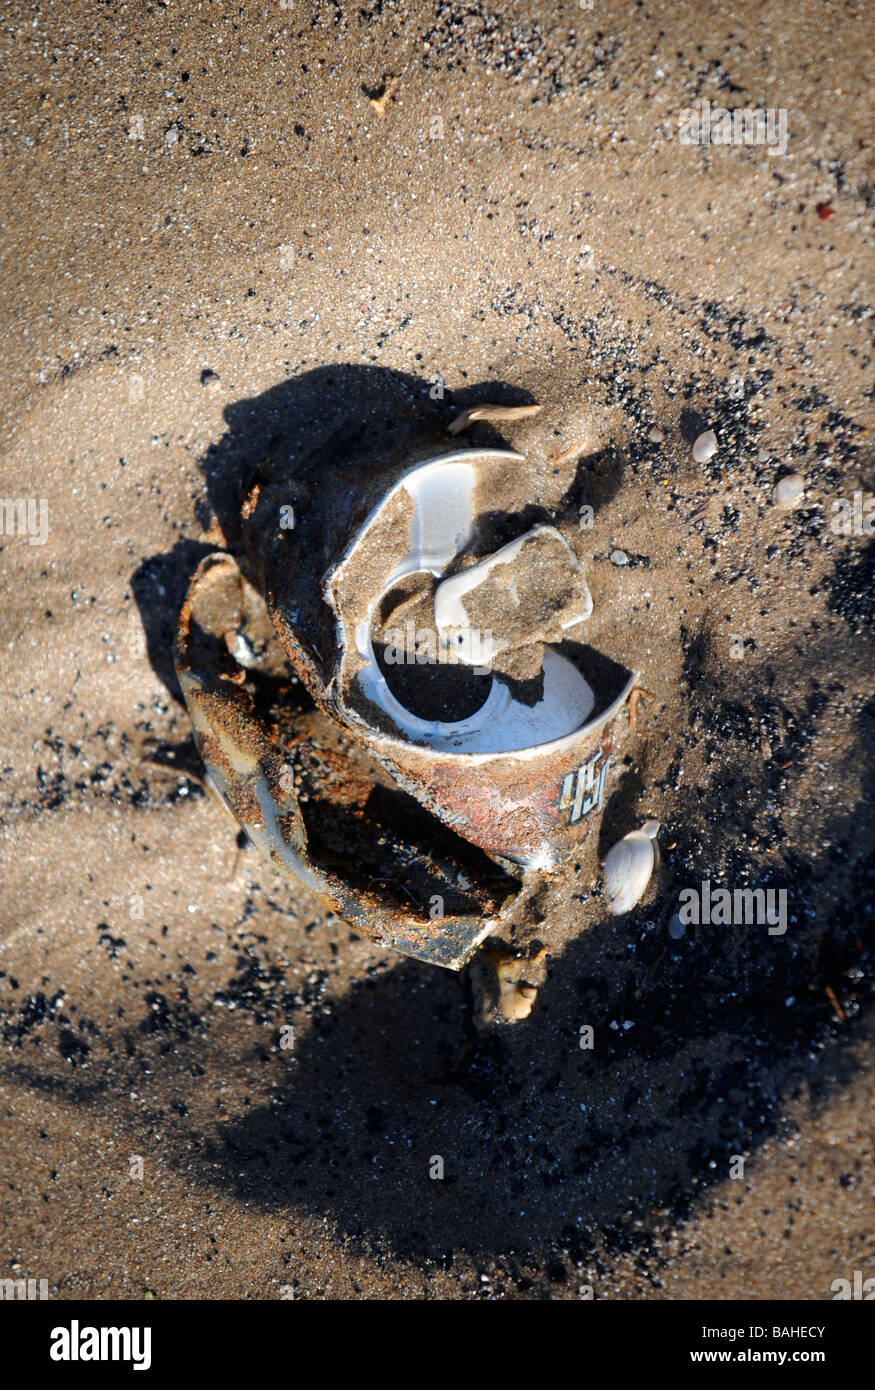 THROWN AWAY DRINKS CAN IN SAND ON A UK BEACH Stock Photo